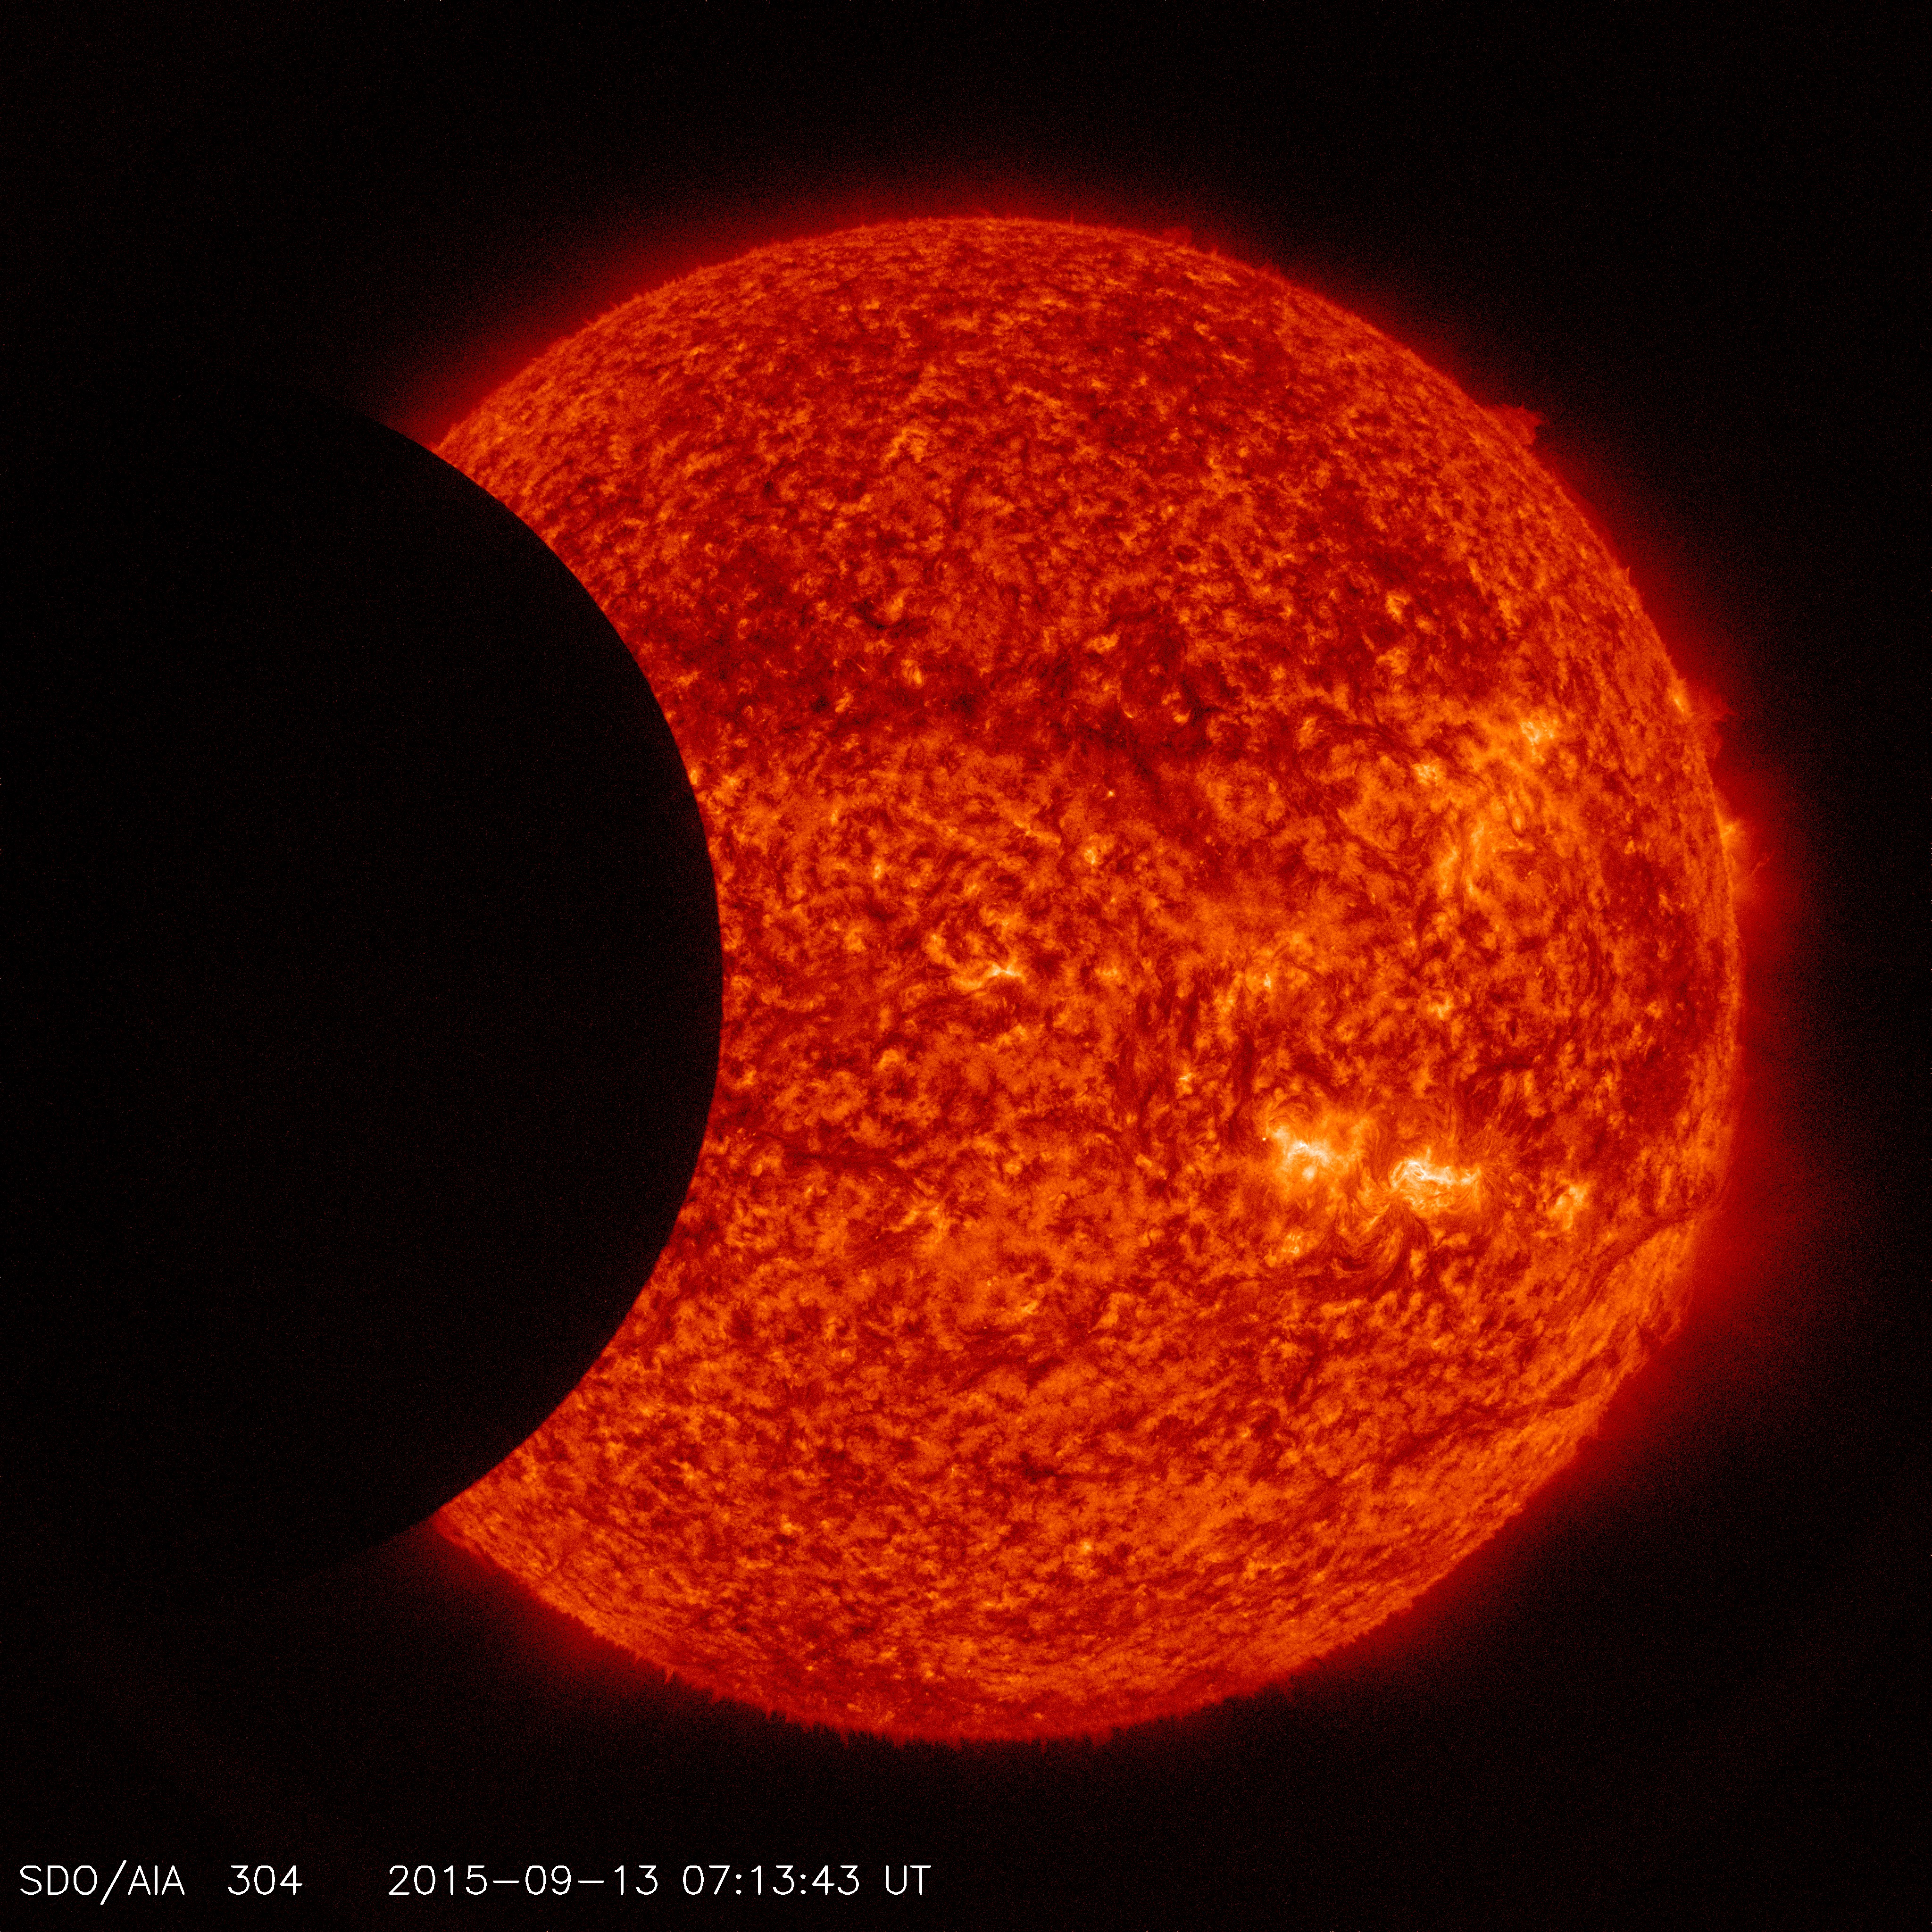 Image of the moon transiting across the sun, taken by SDO in 304 angstroms on September 13, 2015. Credit: NASA/SDO